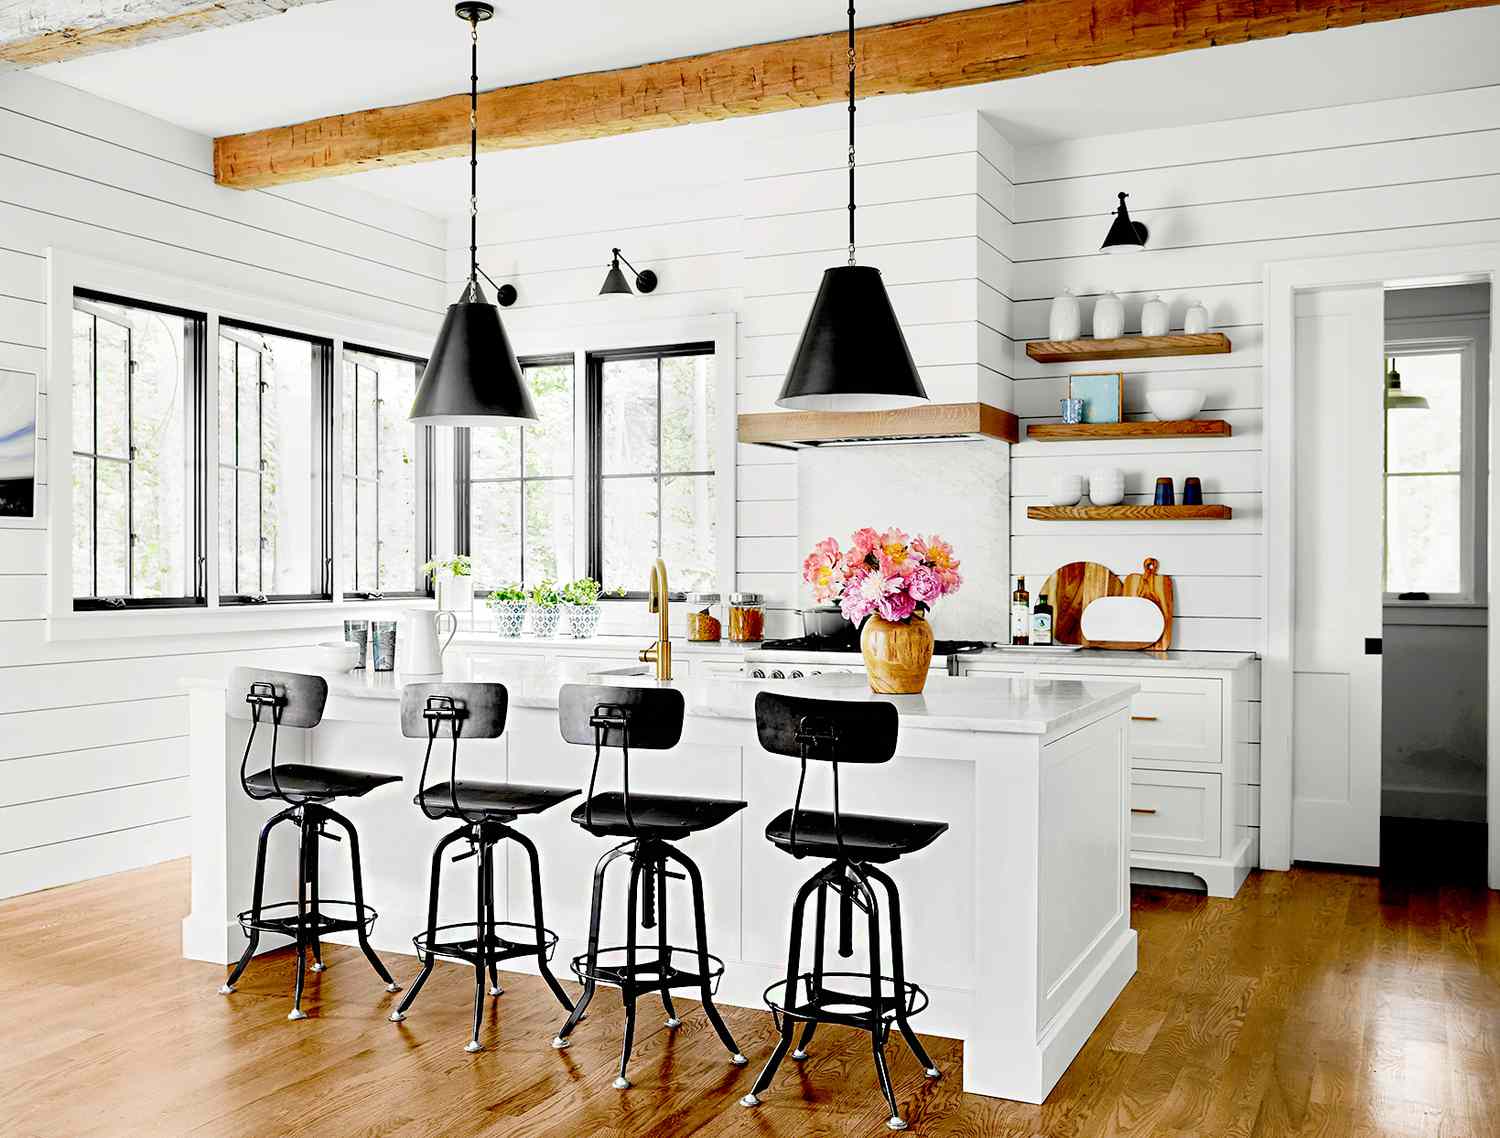 Modern farmhouse kitchens with bright white cabinets and a white marble countertop